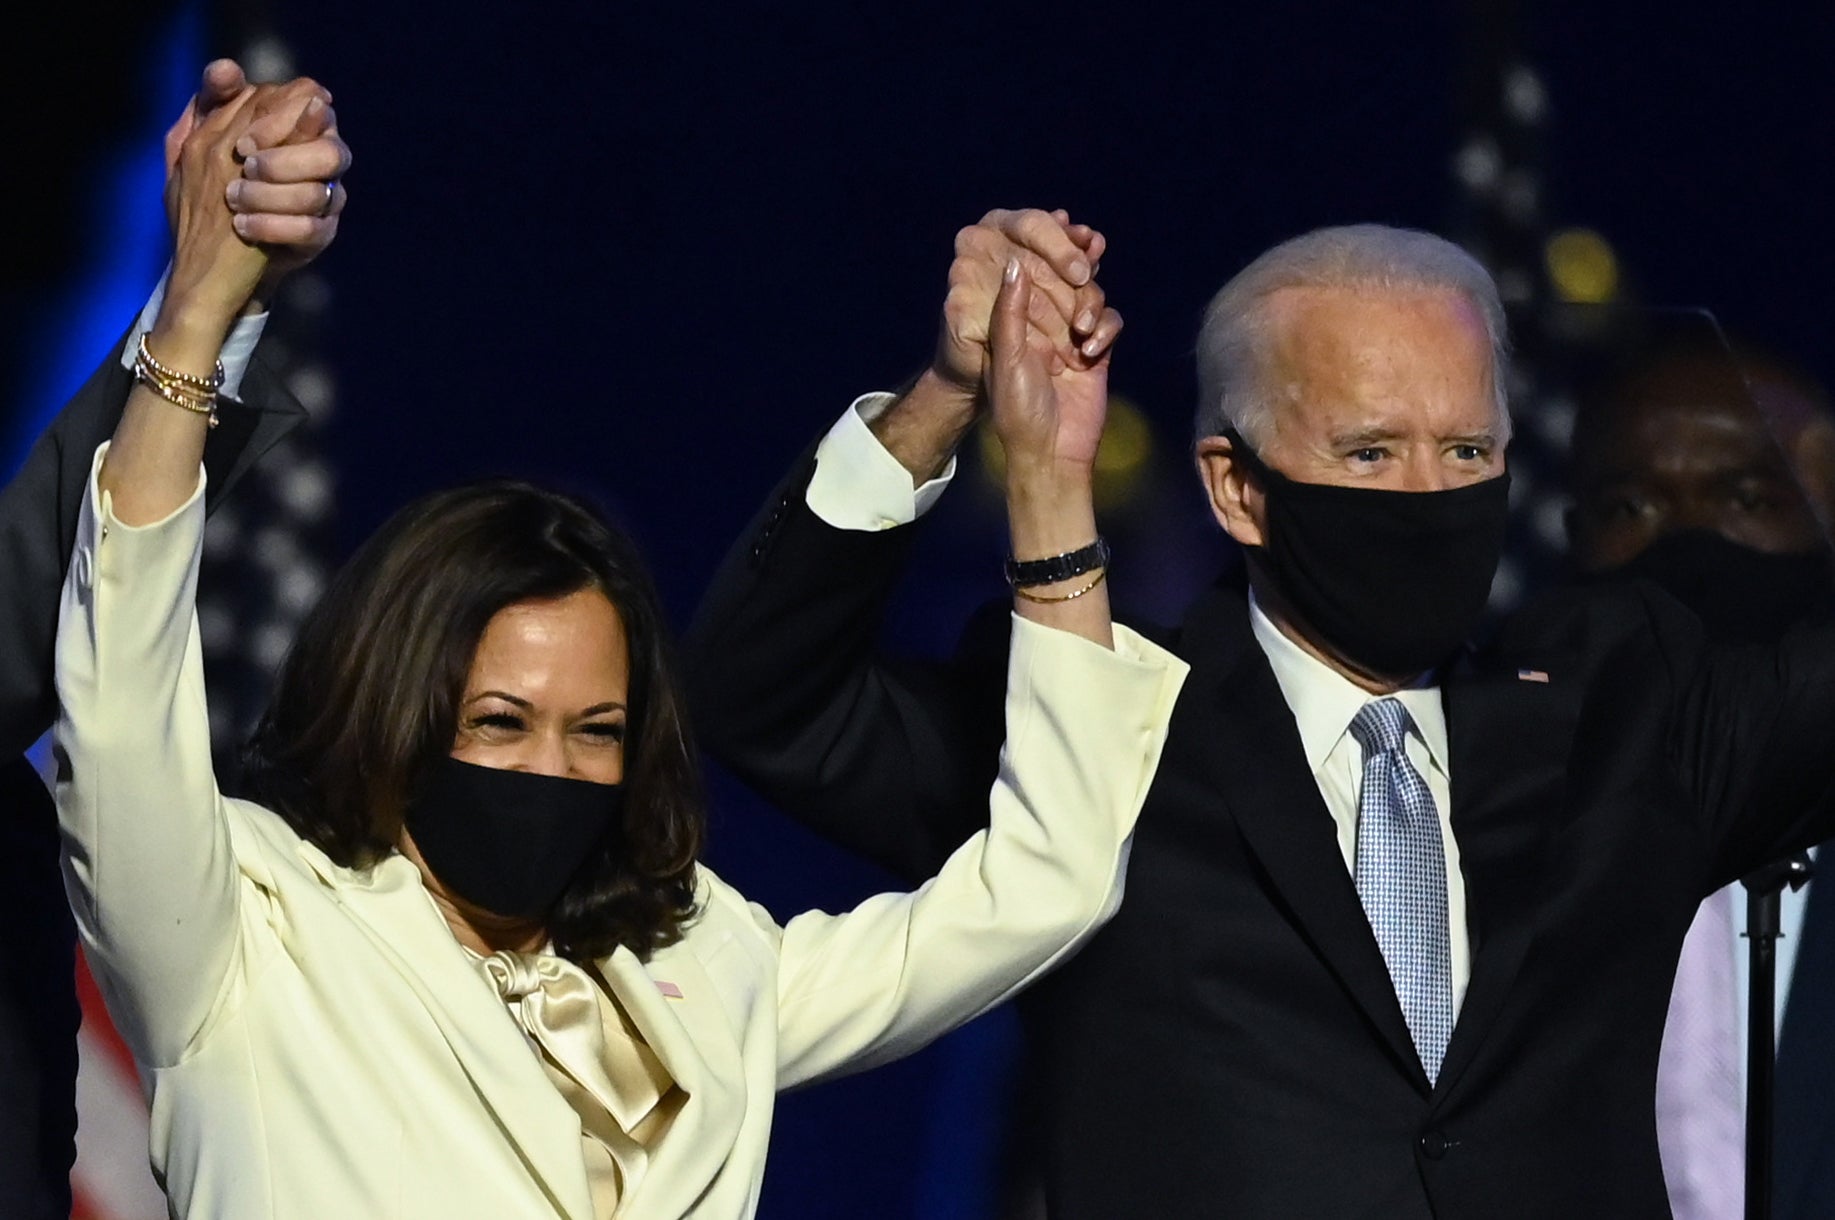 Get Ready For The Historic Biden-Harris Inauguration